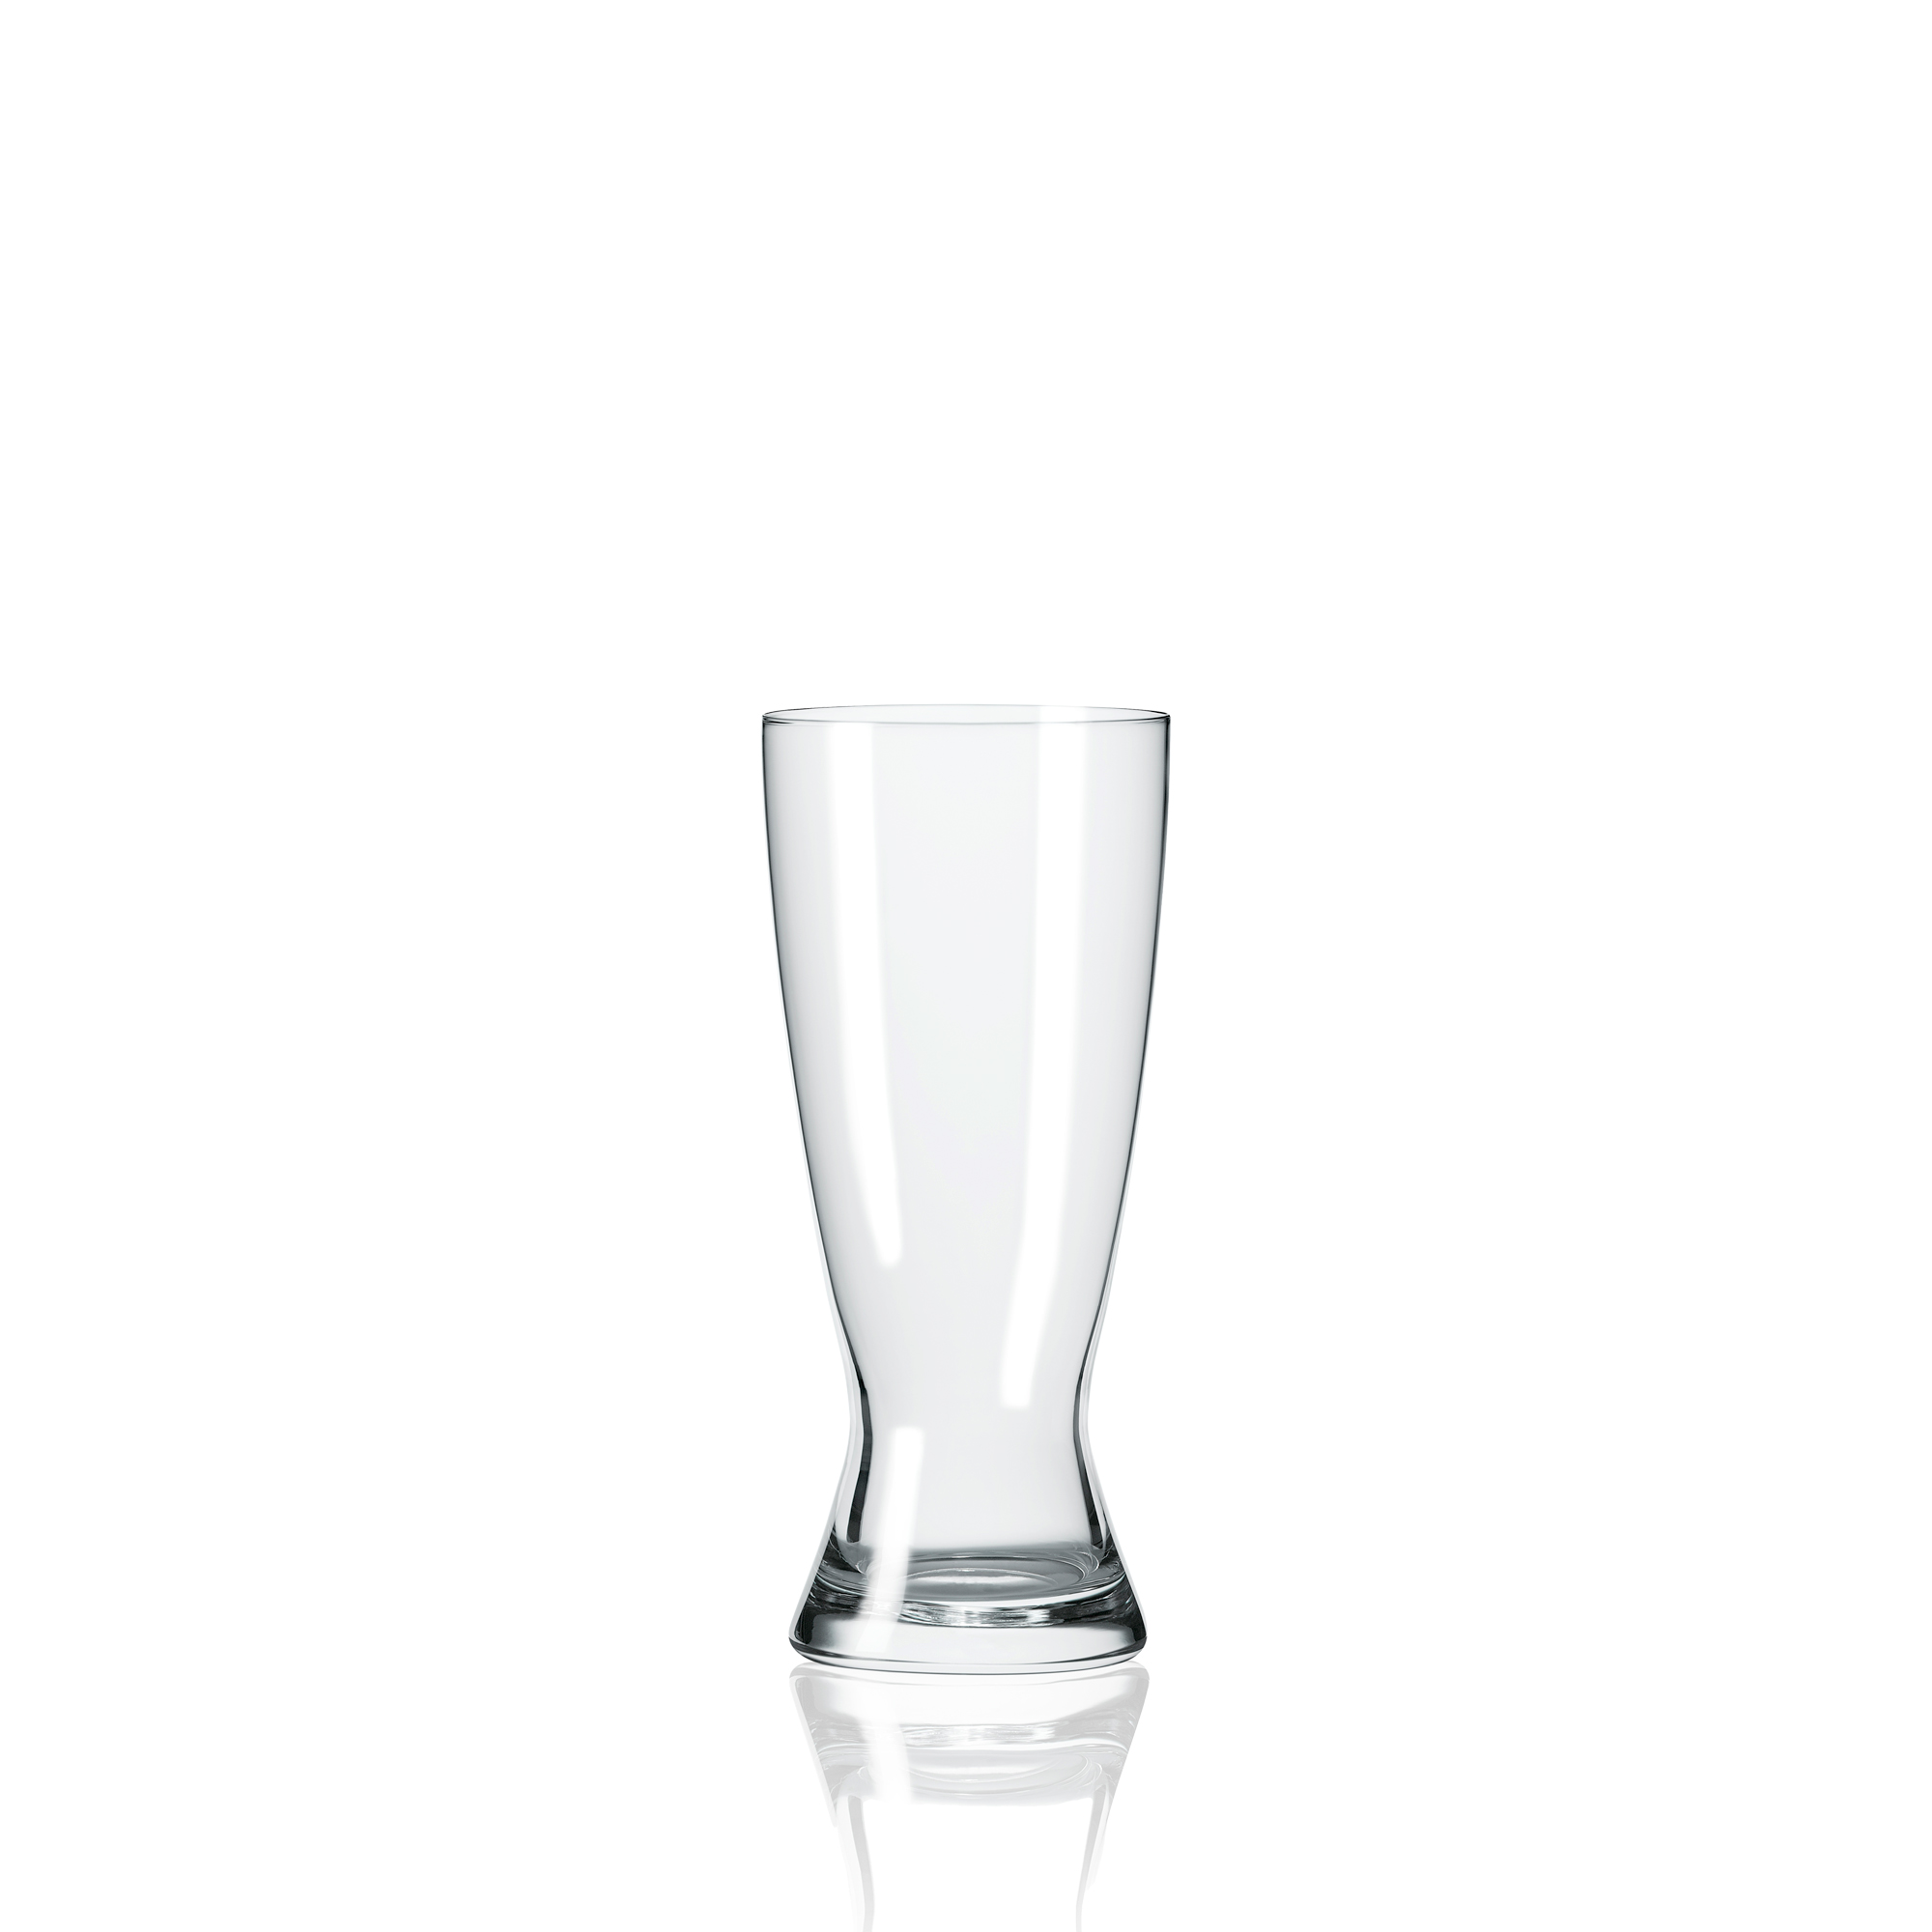 52.8 (Oz) Large Capacity Beer Glasses. For Bar,Beer,Wheat